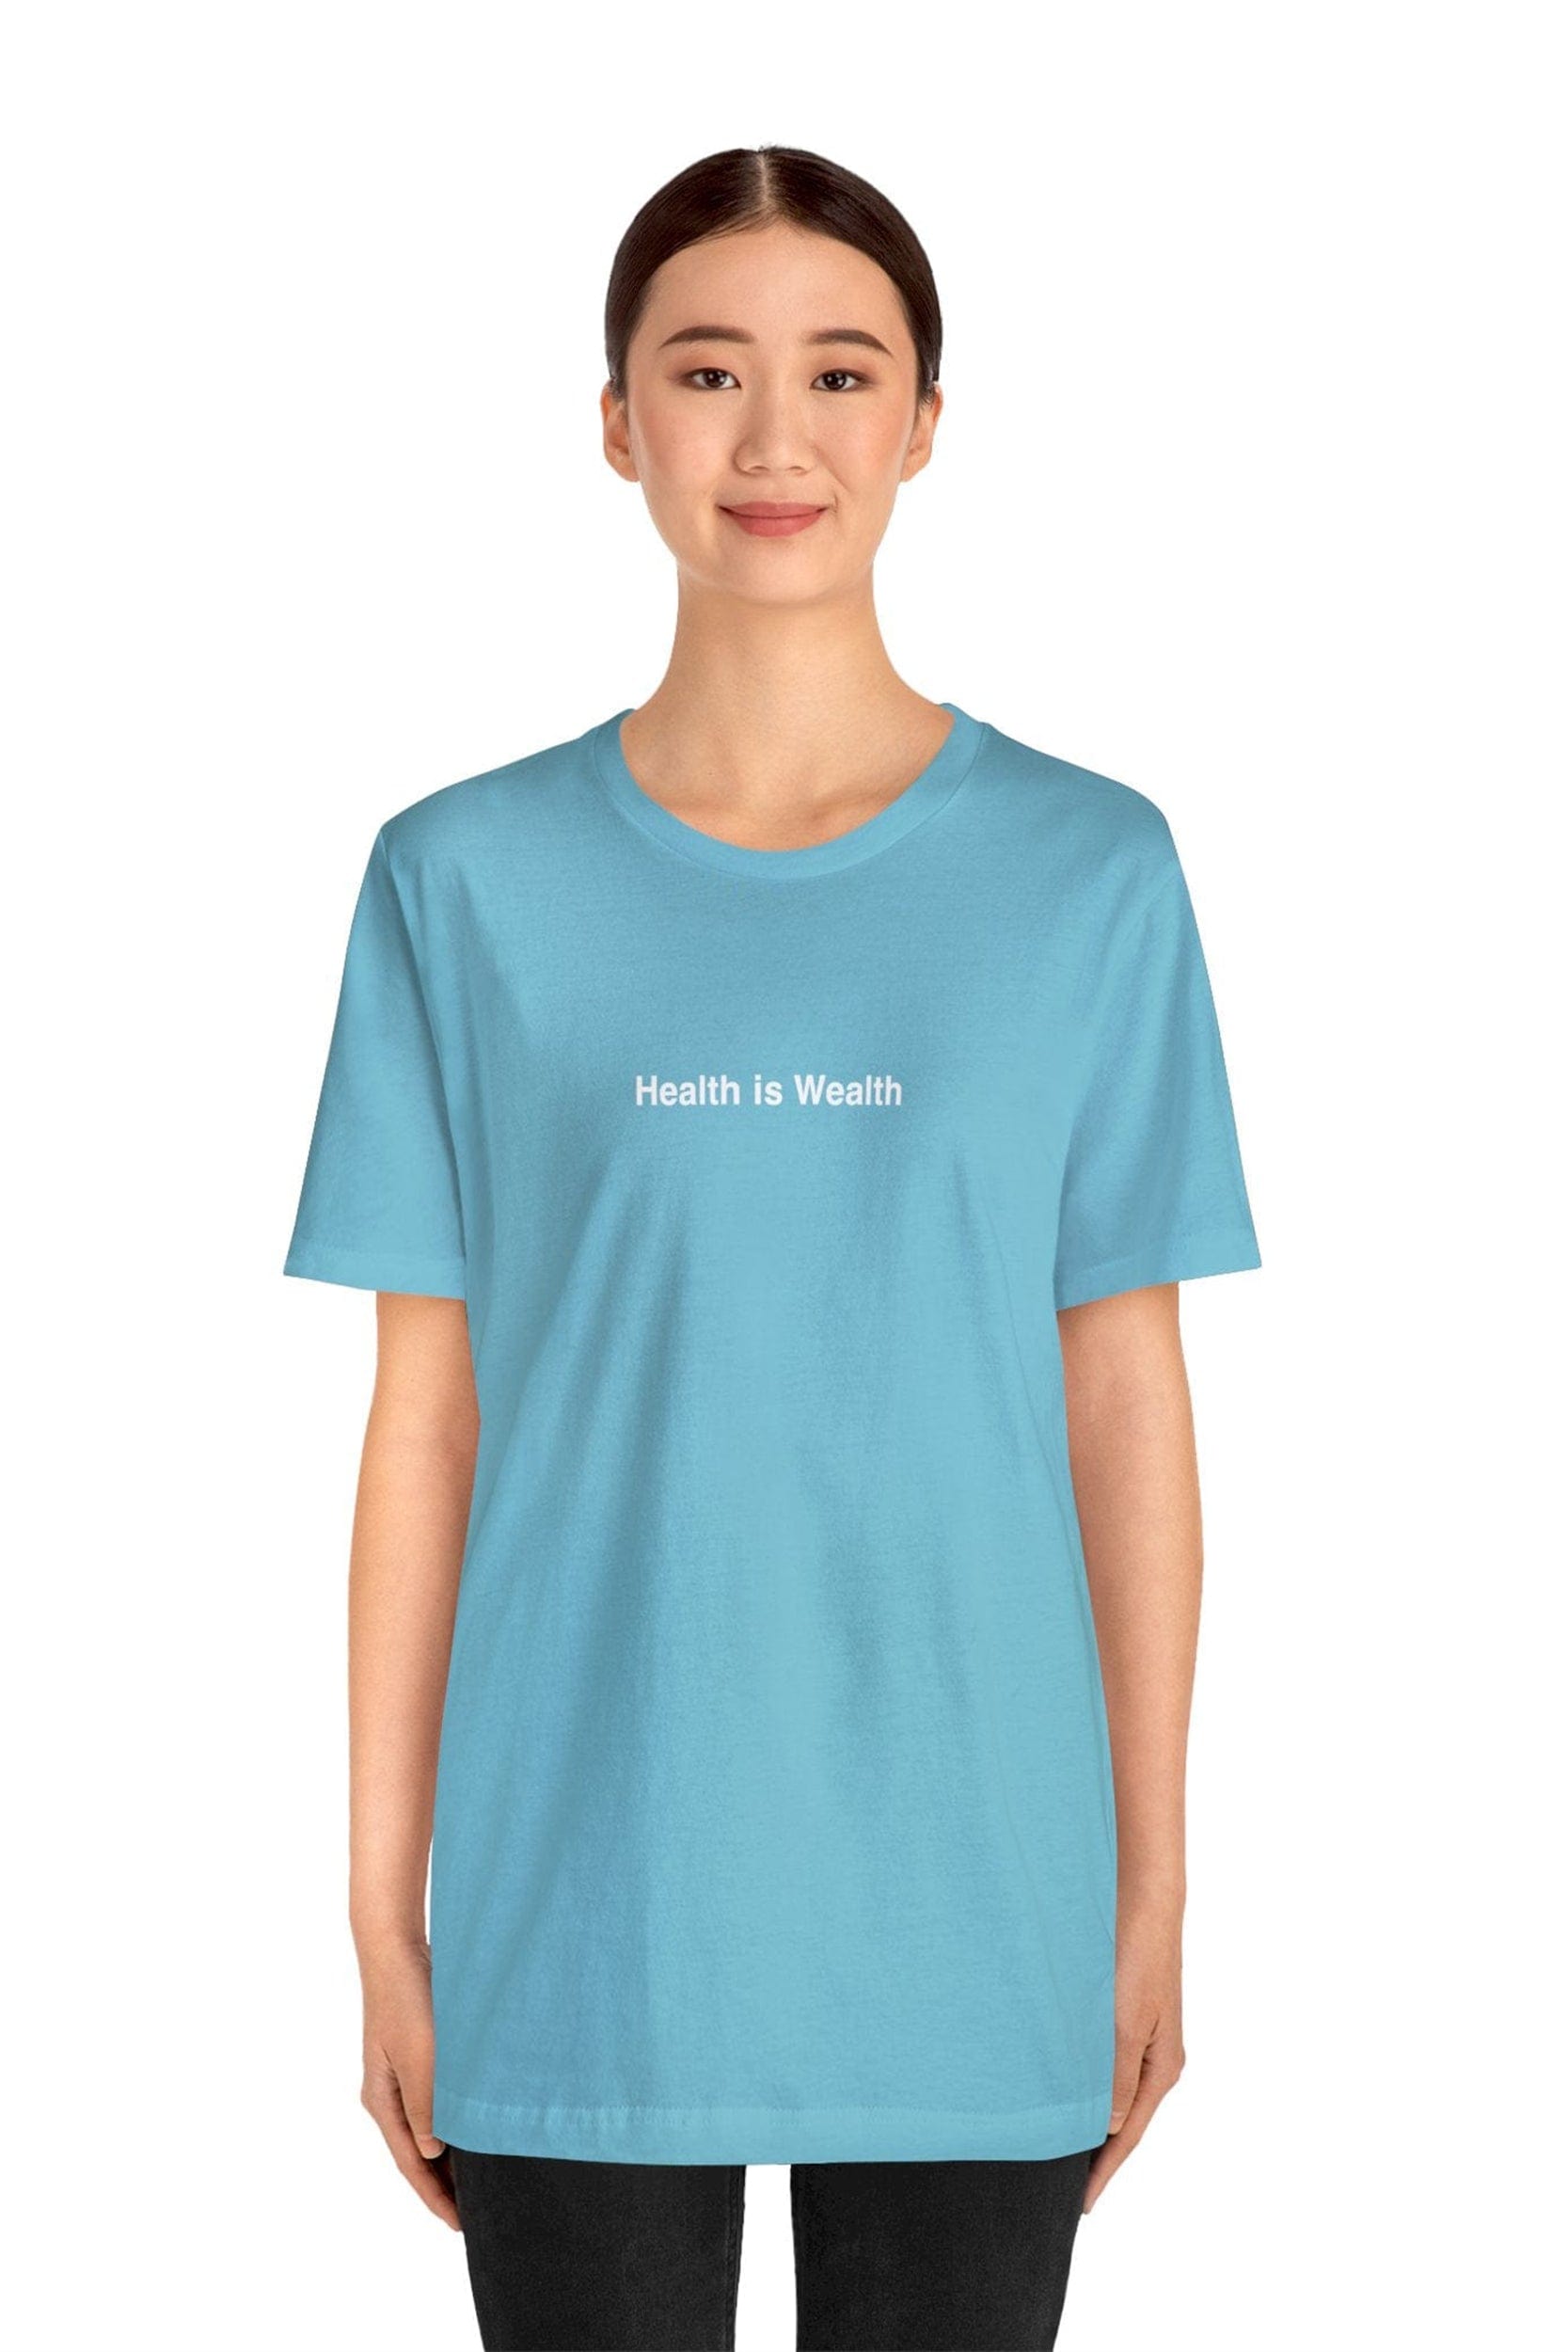 "Health is Wealth" T-Shirt